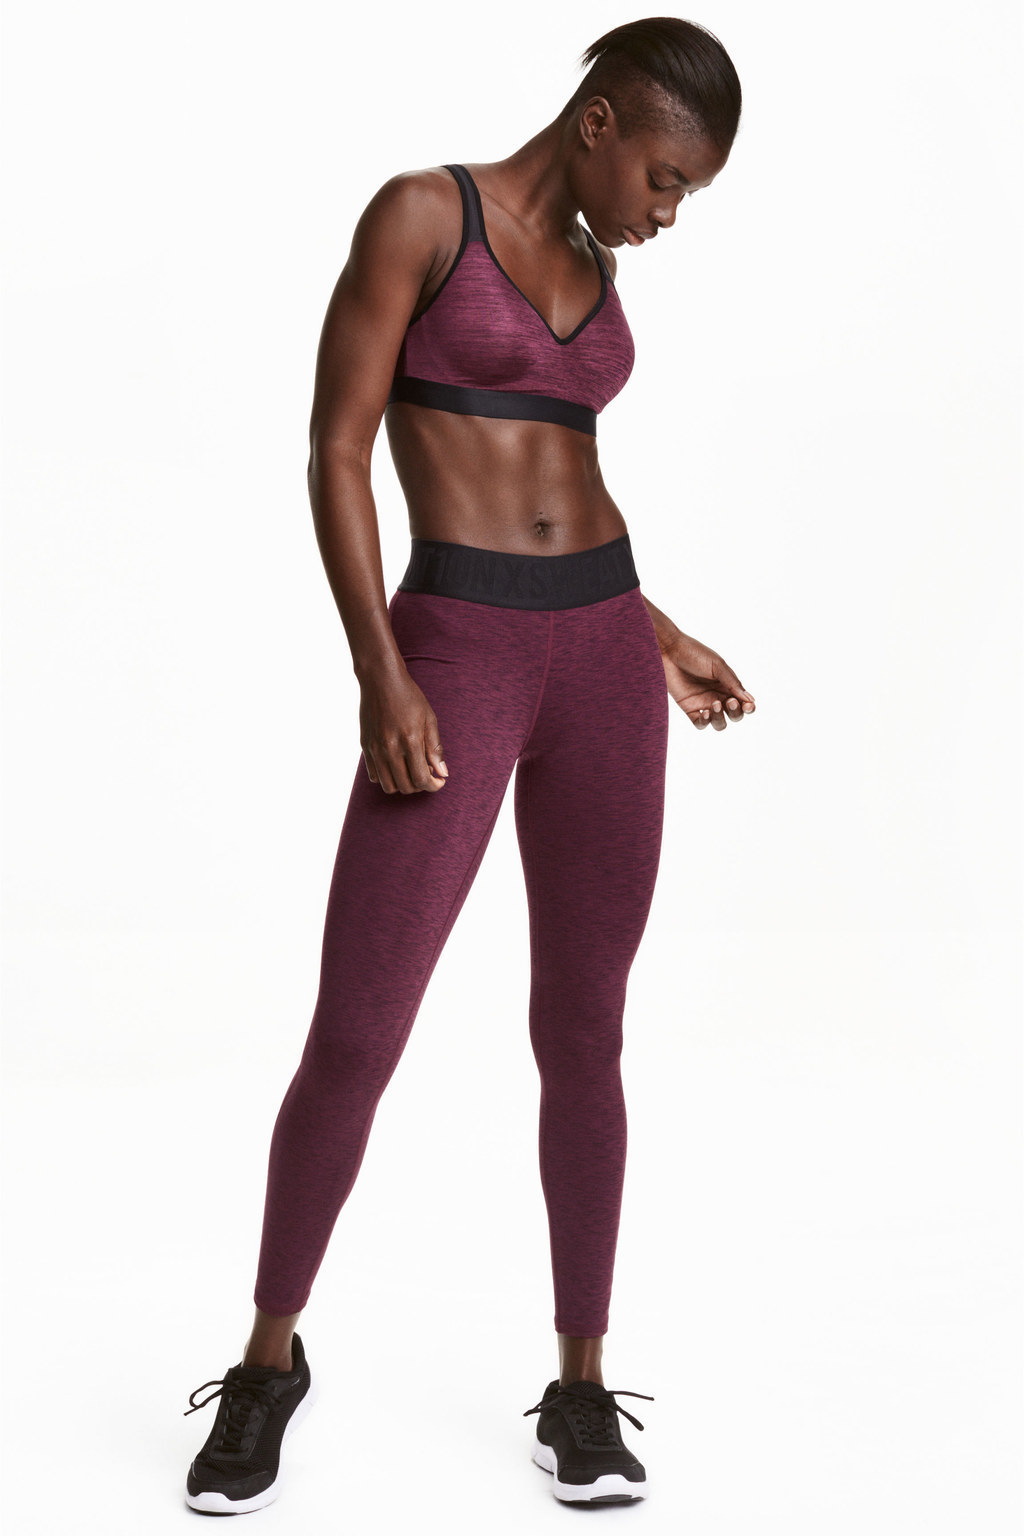 affordable workout outfits